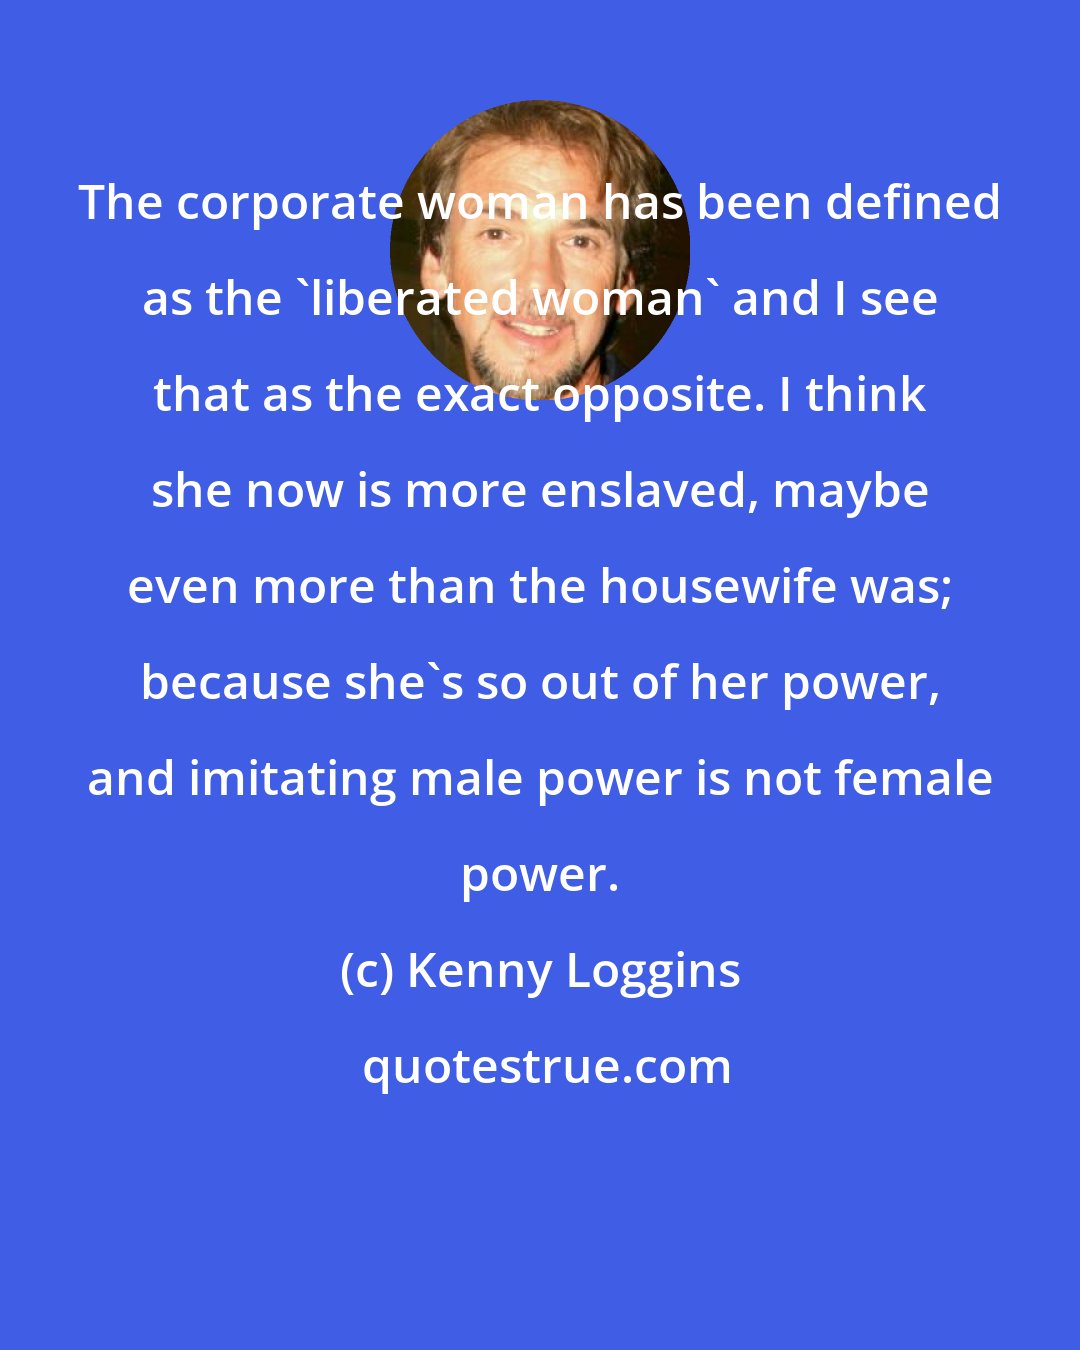 Kenny Loggins: The corporate woman has been defined as the 'liberated woman' and I see that as the exact opposite. I think she now is more enslaved, maybe even more than the housewife was; because she's so out of her power, and imitating male power is not female power.